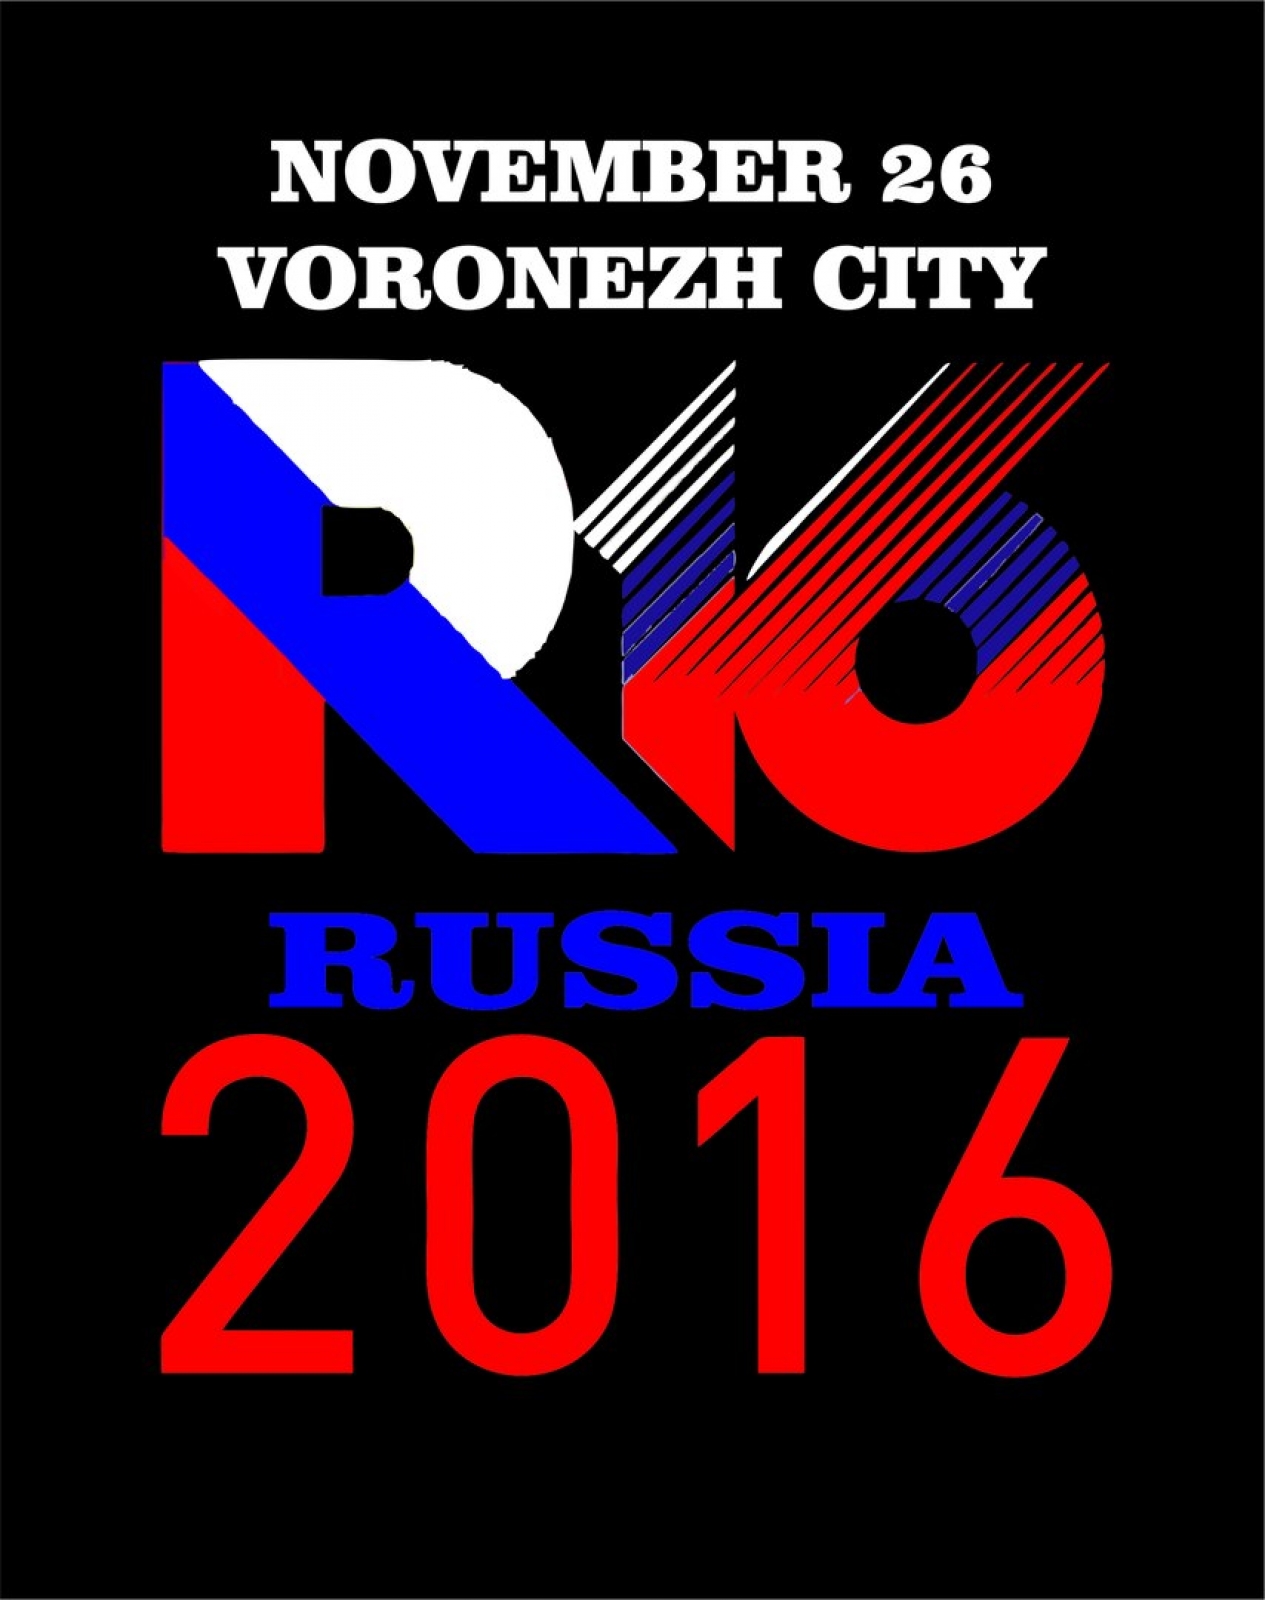 R16 Russia 2016 poster